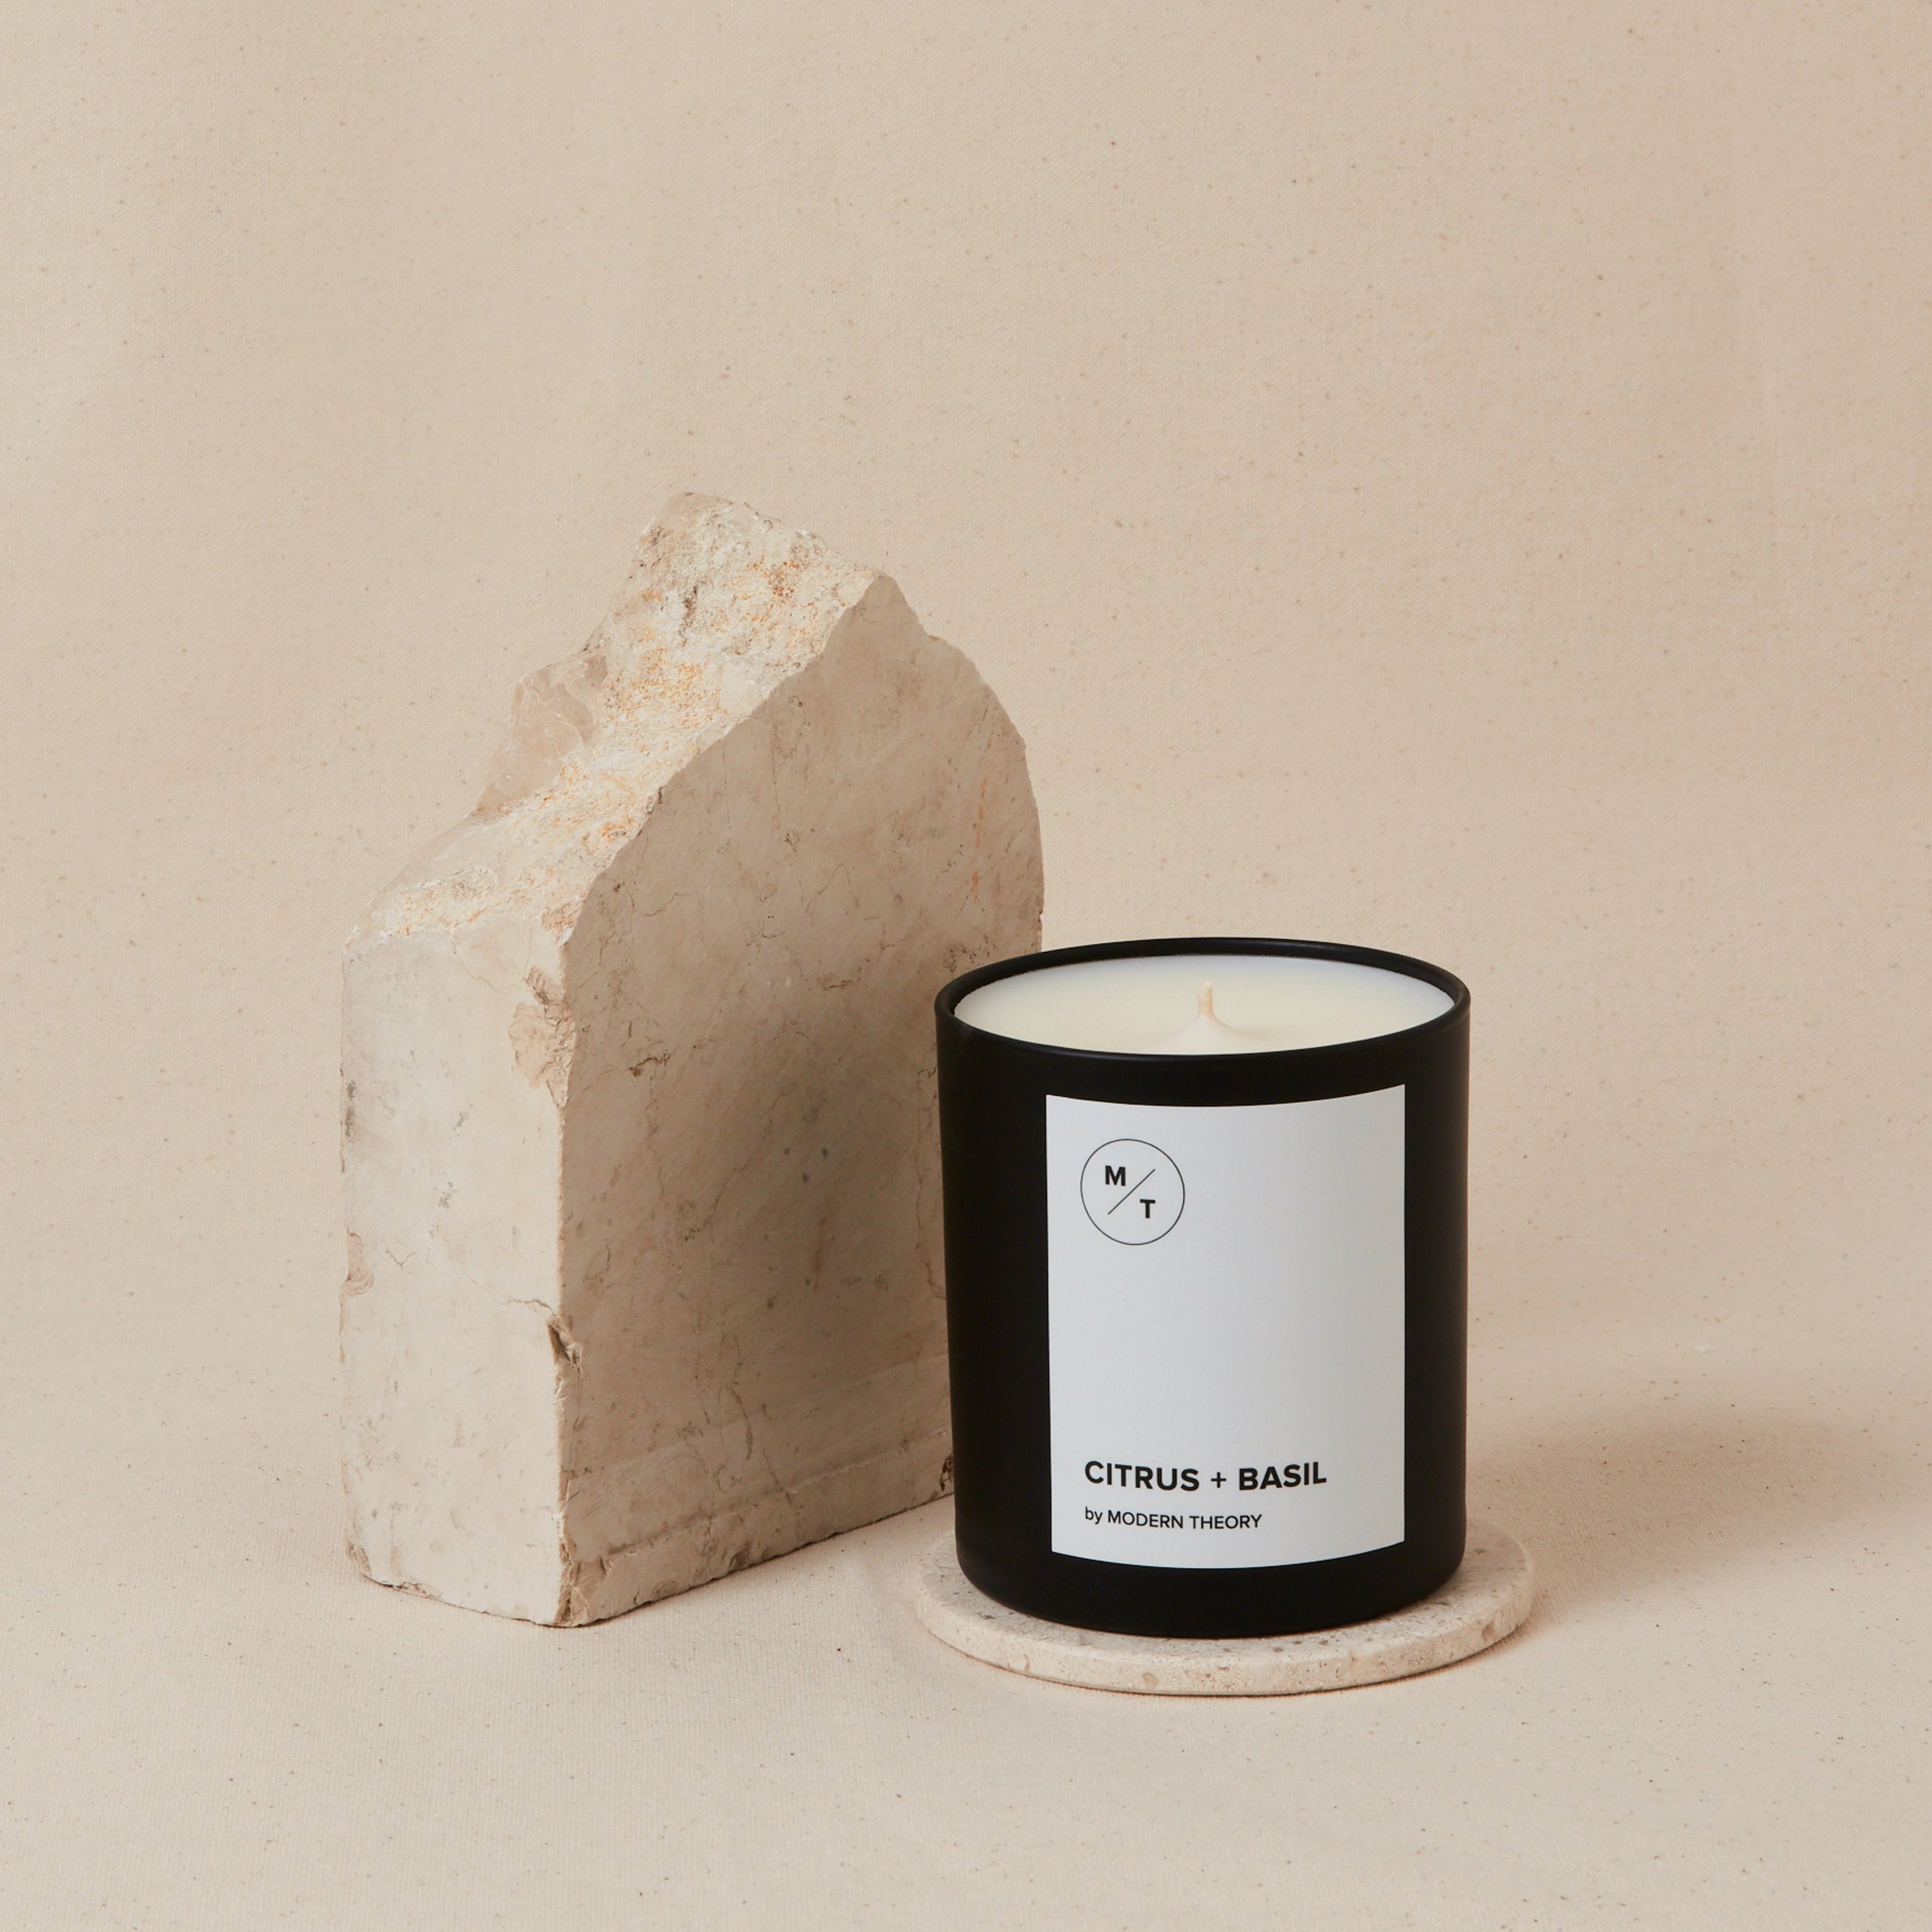 Mother Nature's Best Market Modern Theory Citrus + Basil Candle All-Natural, Cruelty-Free, Gluten-Free, Reusable, Recyclable, Vegan